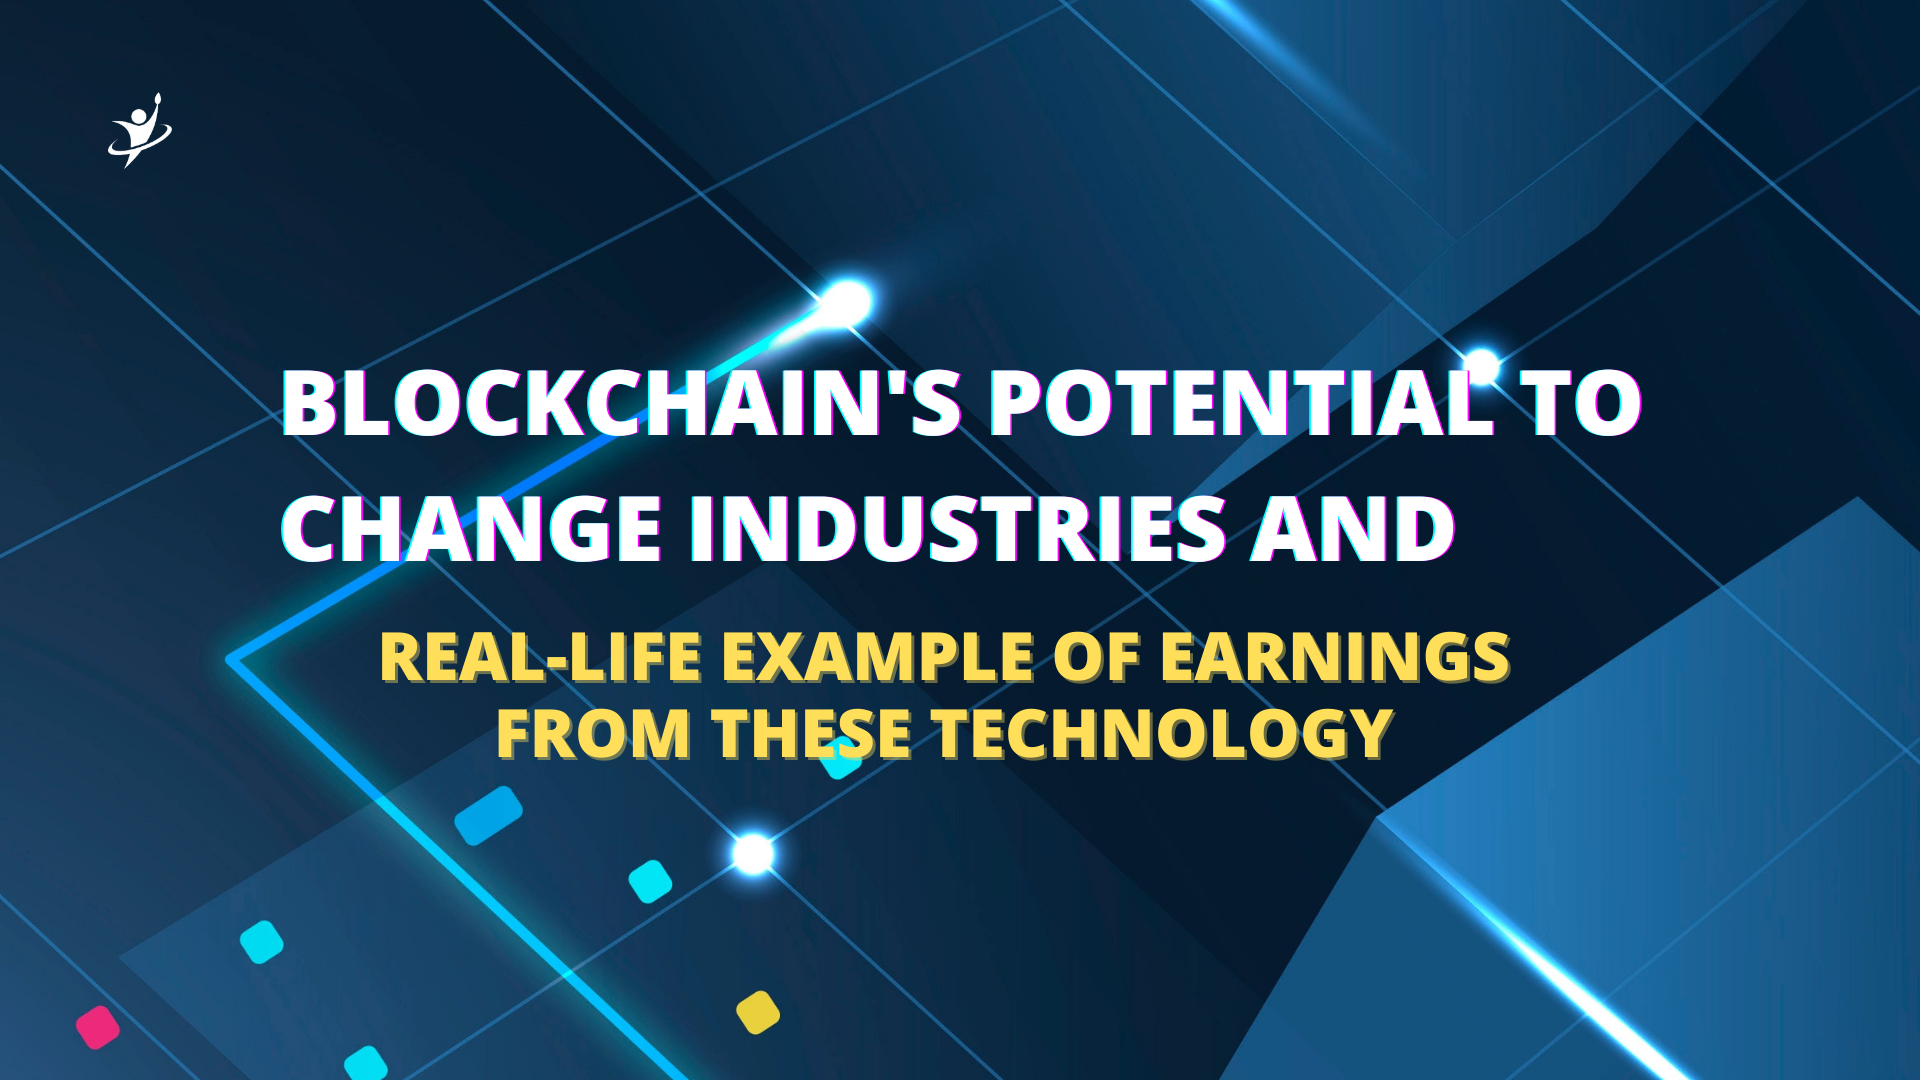 Blockchain's Potential to Change Industries and Real-Life Example